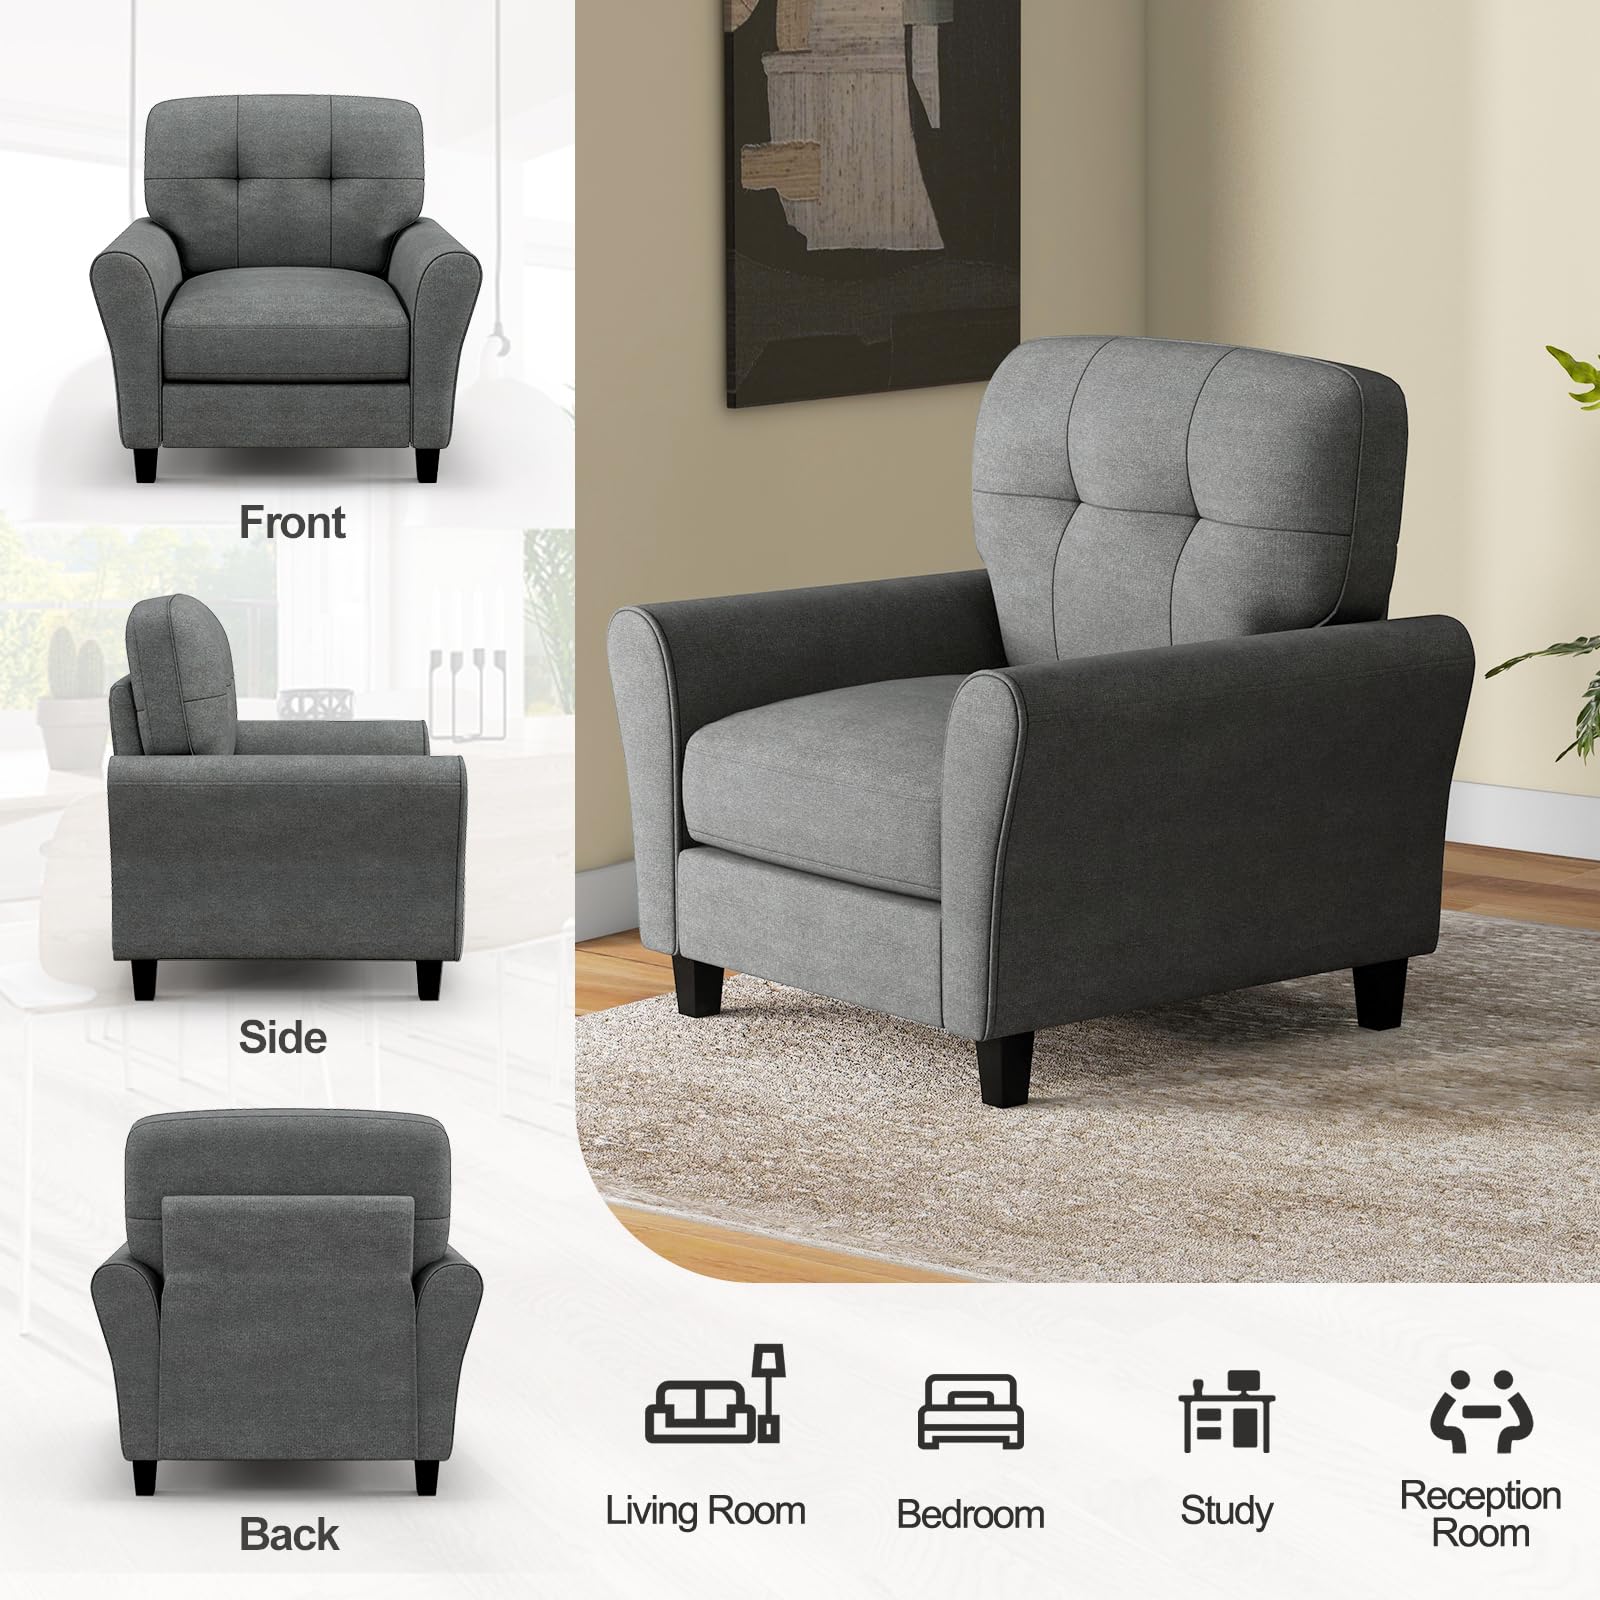 Giantex Modern Mid-Century Accent Chair Set of 2 - Linen Living Room Chair with Tufted Back, Grey